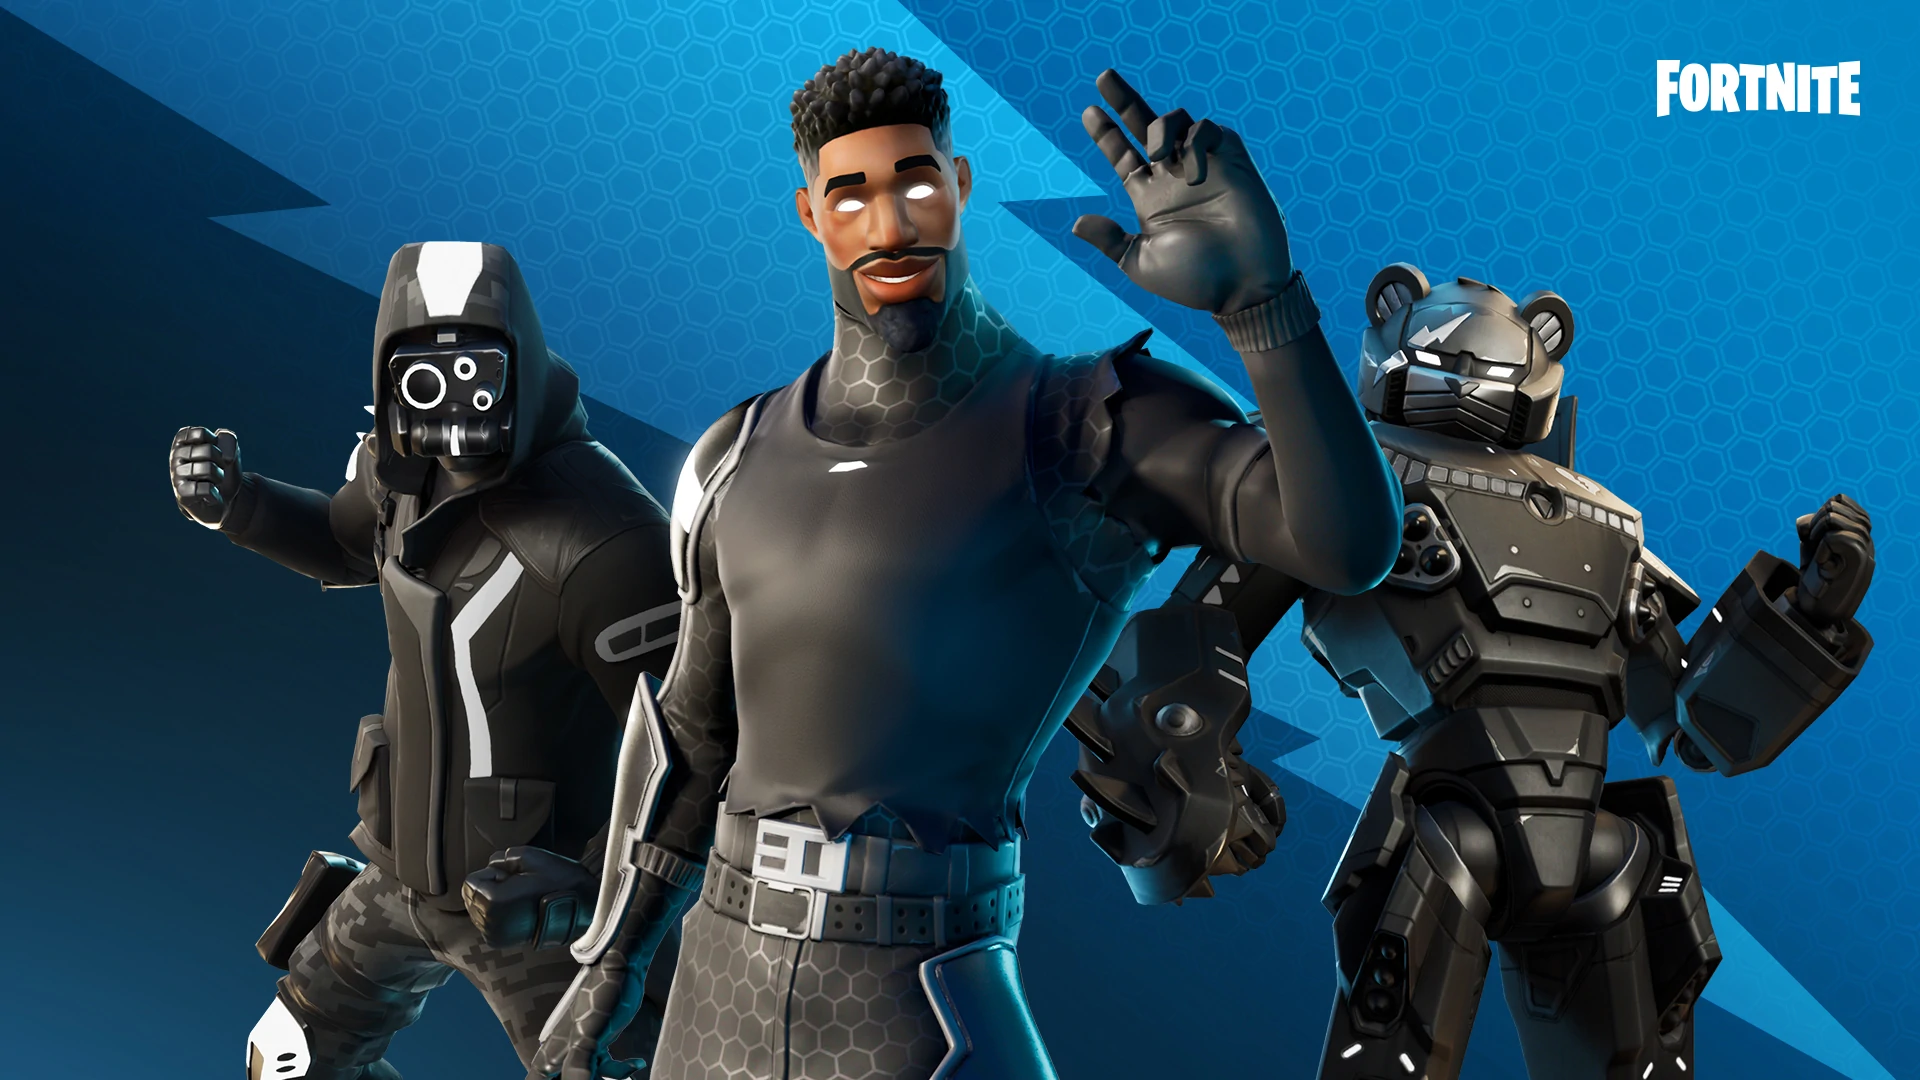 Codenames of Over 50 Scrapped Cosmetics Leaked in The Fortnite v17.40 Update